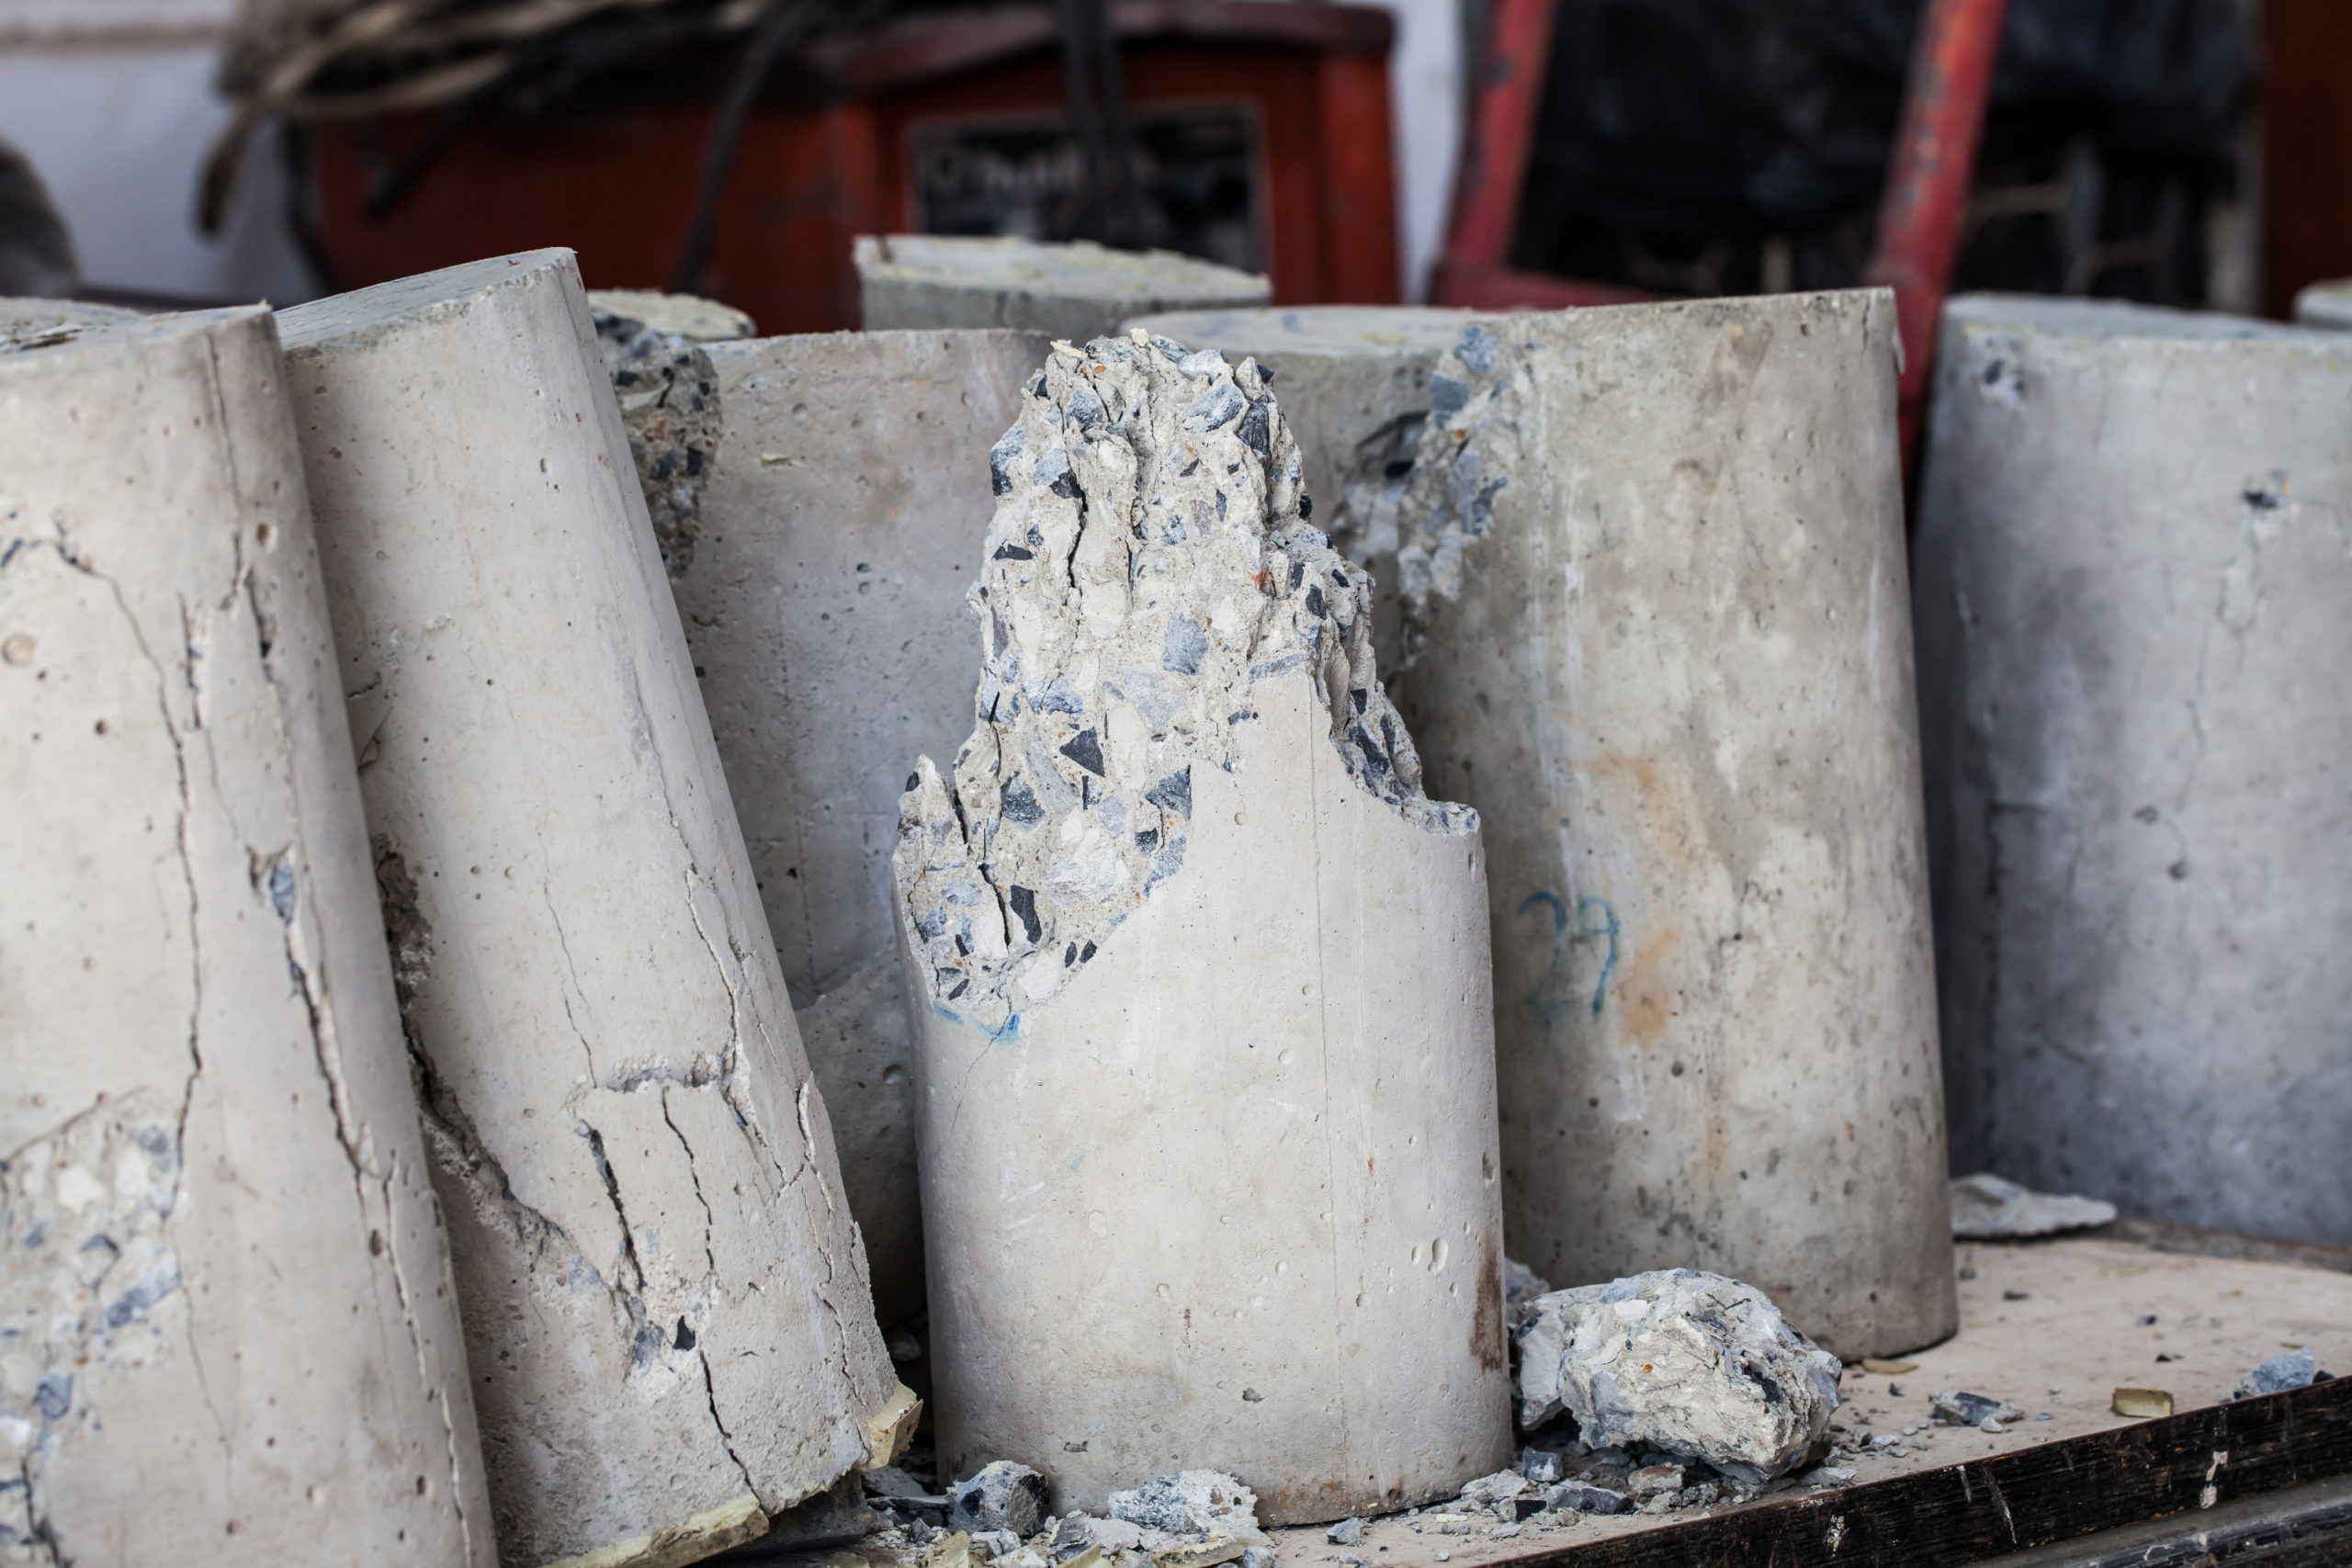 A cluster of concrete cylinder samples rest together on a table with a cracked sample in the middle.